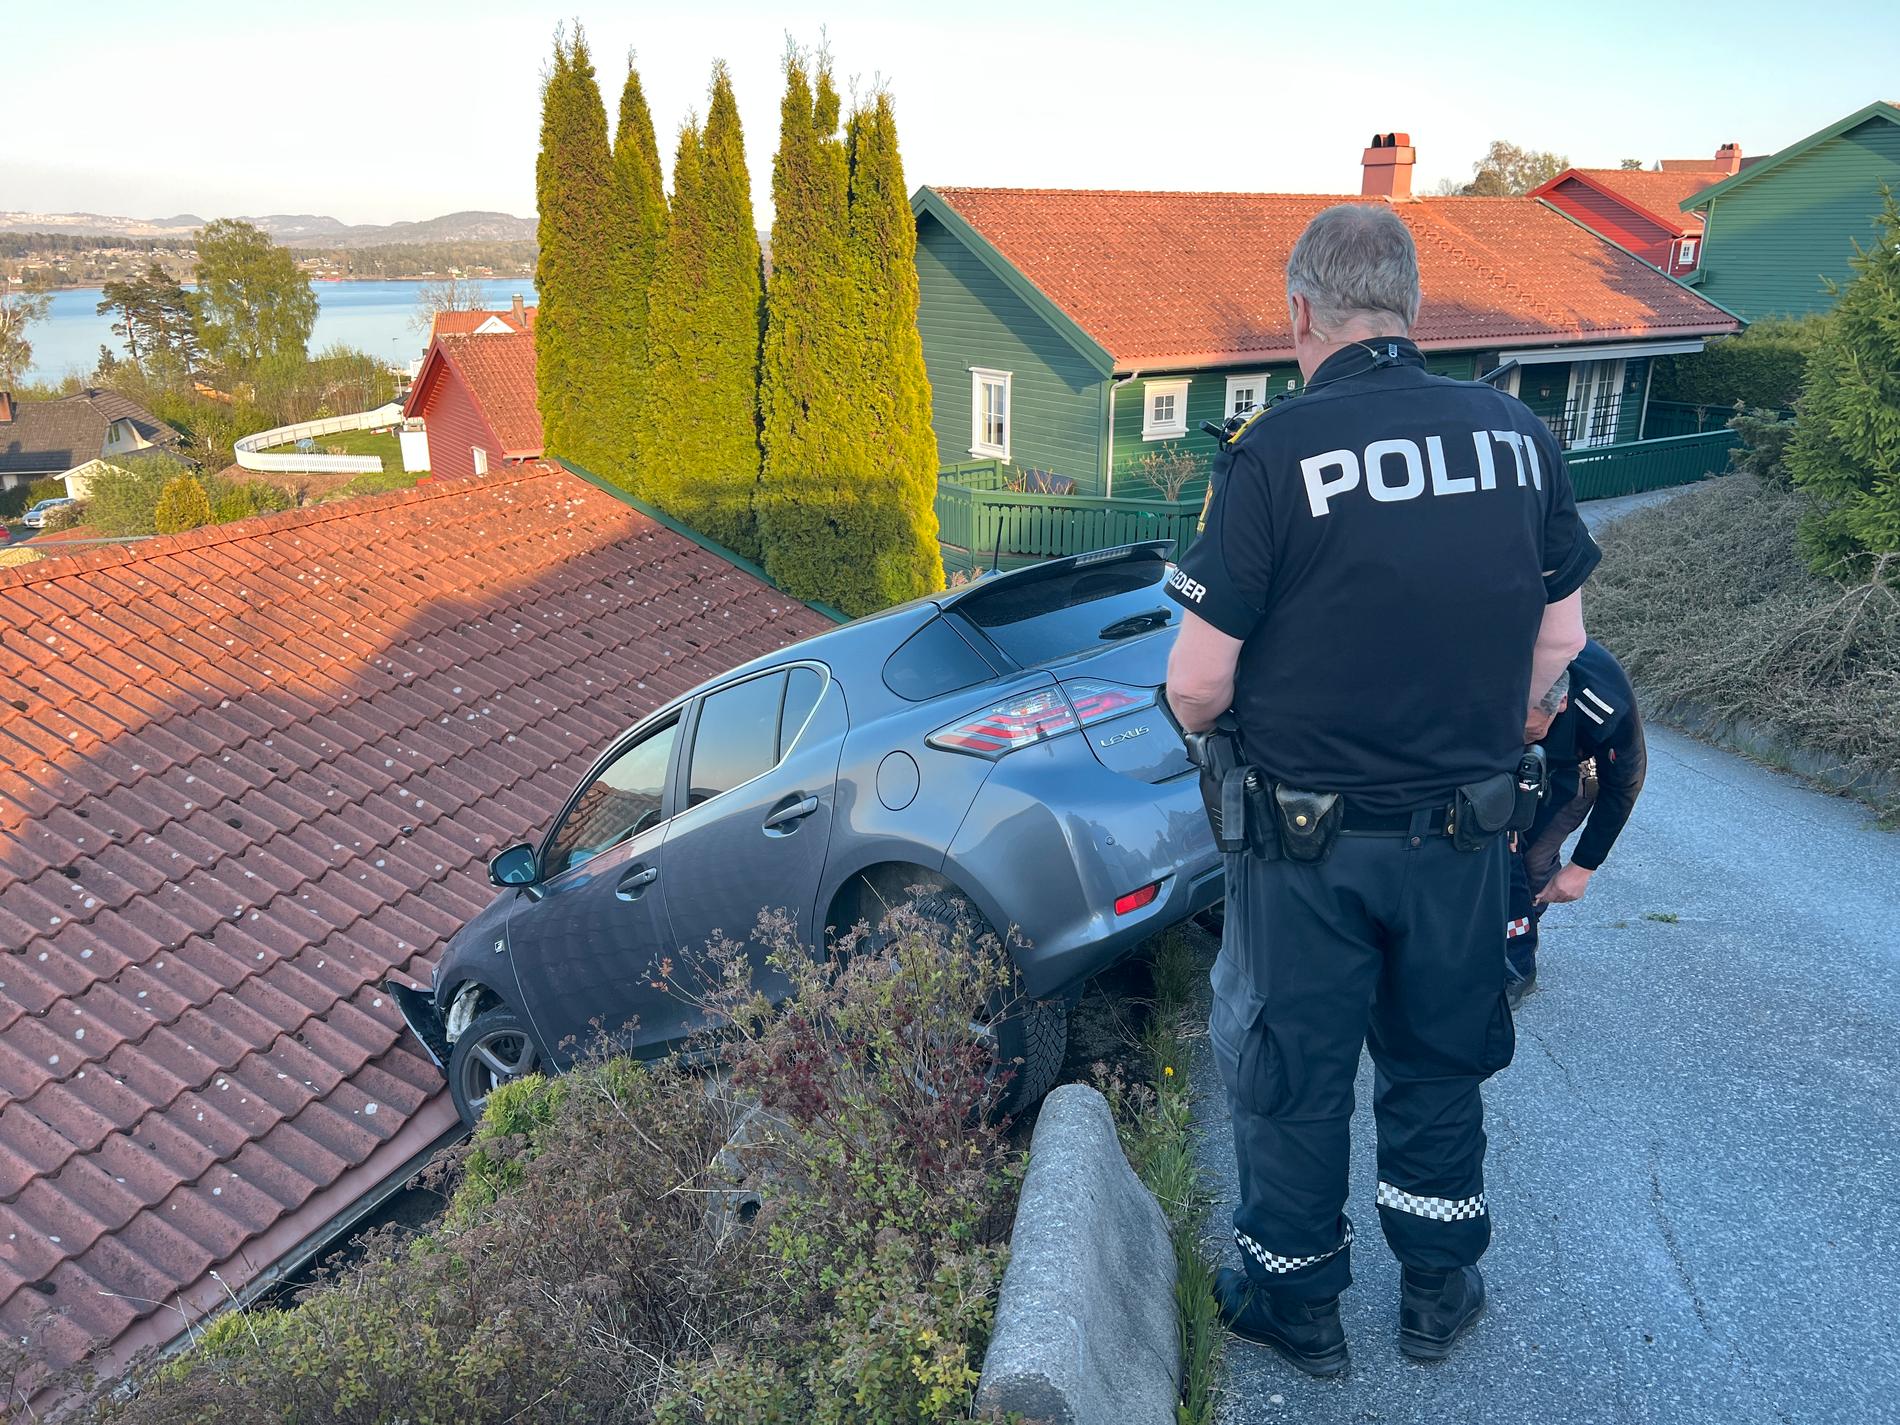 A self-driving car crashed into the roof of the garage